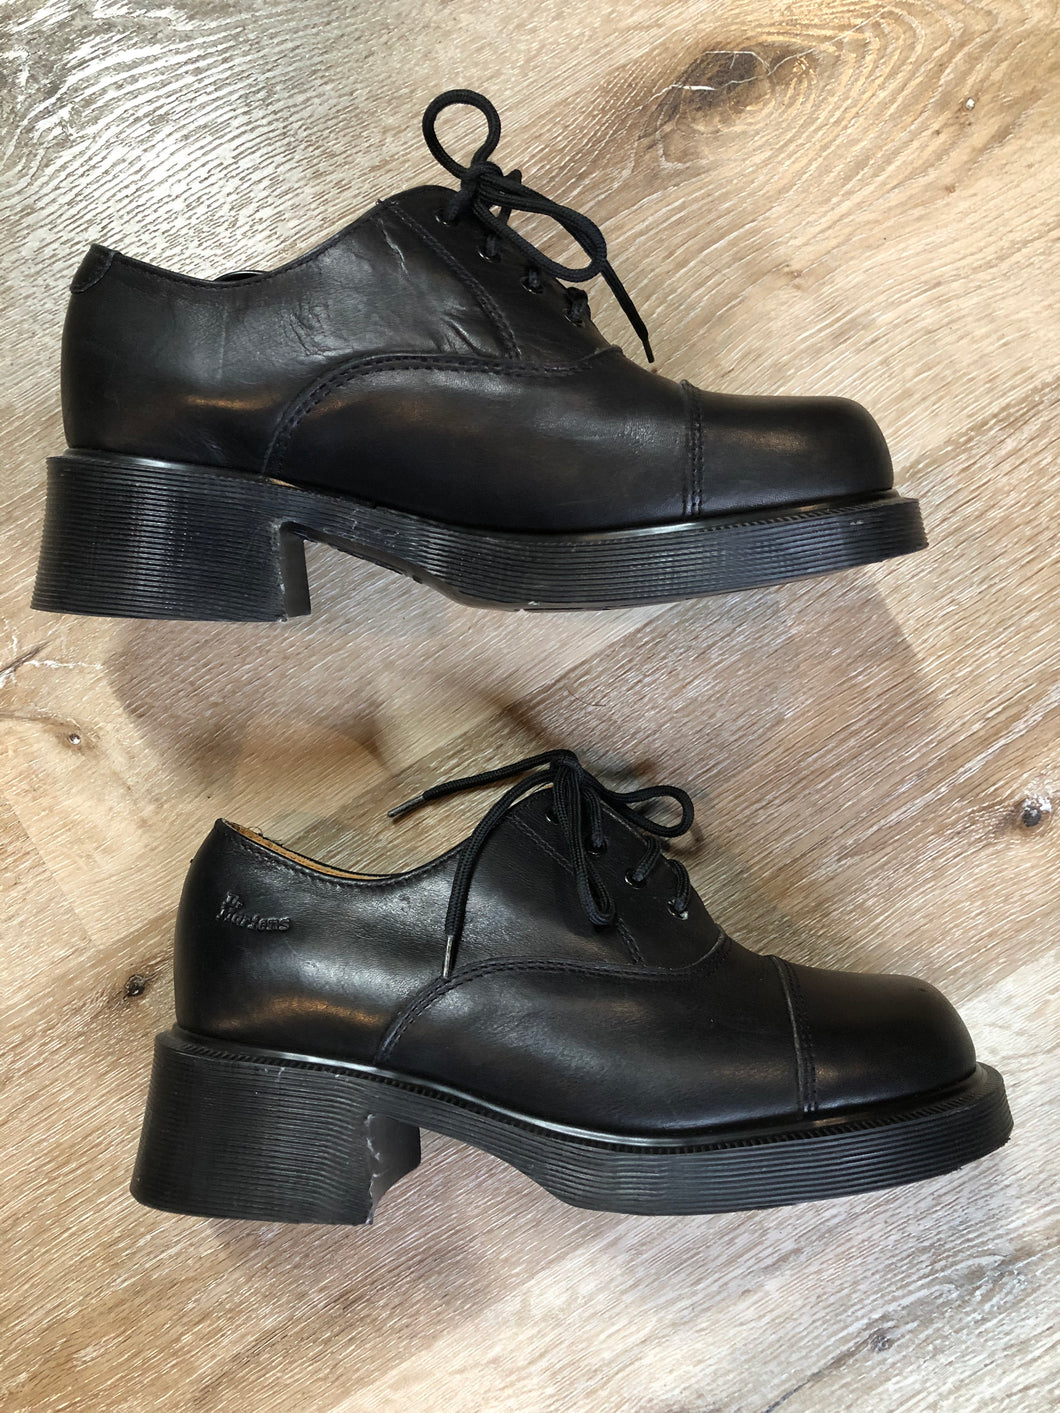 Kingspier Vintage - Brand new, made in UK! Black Doc Martens, heeled 70s style (more dramatic than the modern 